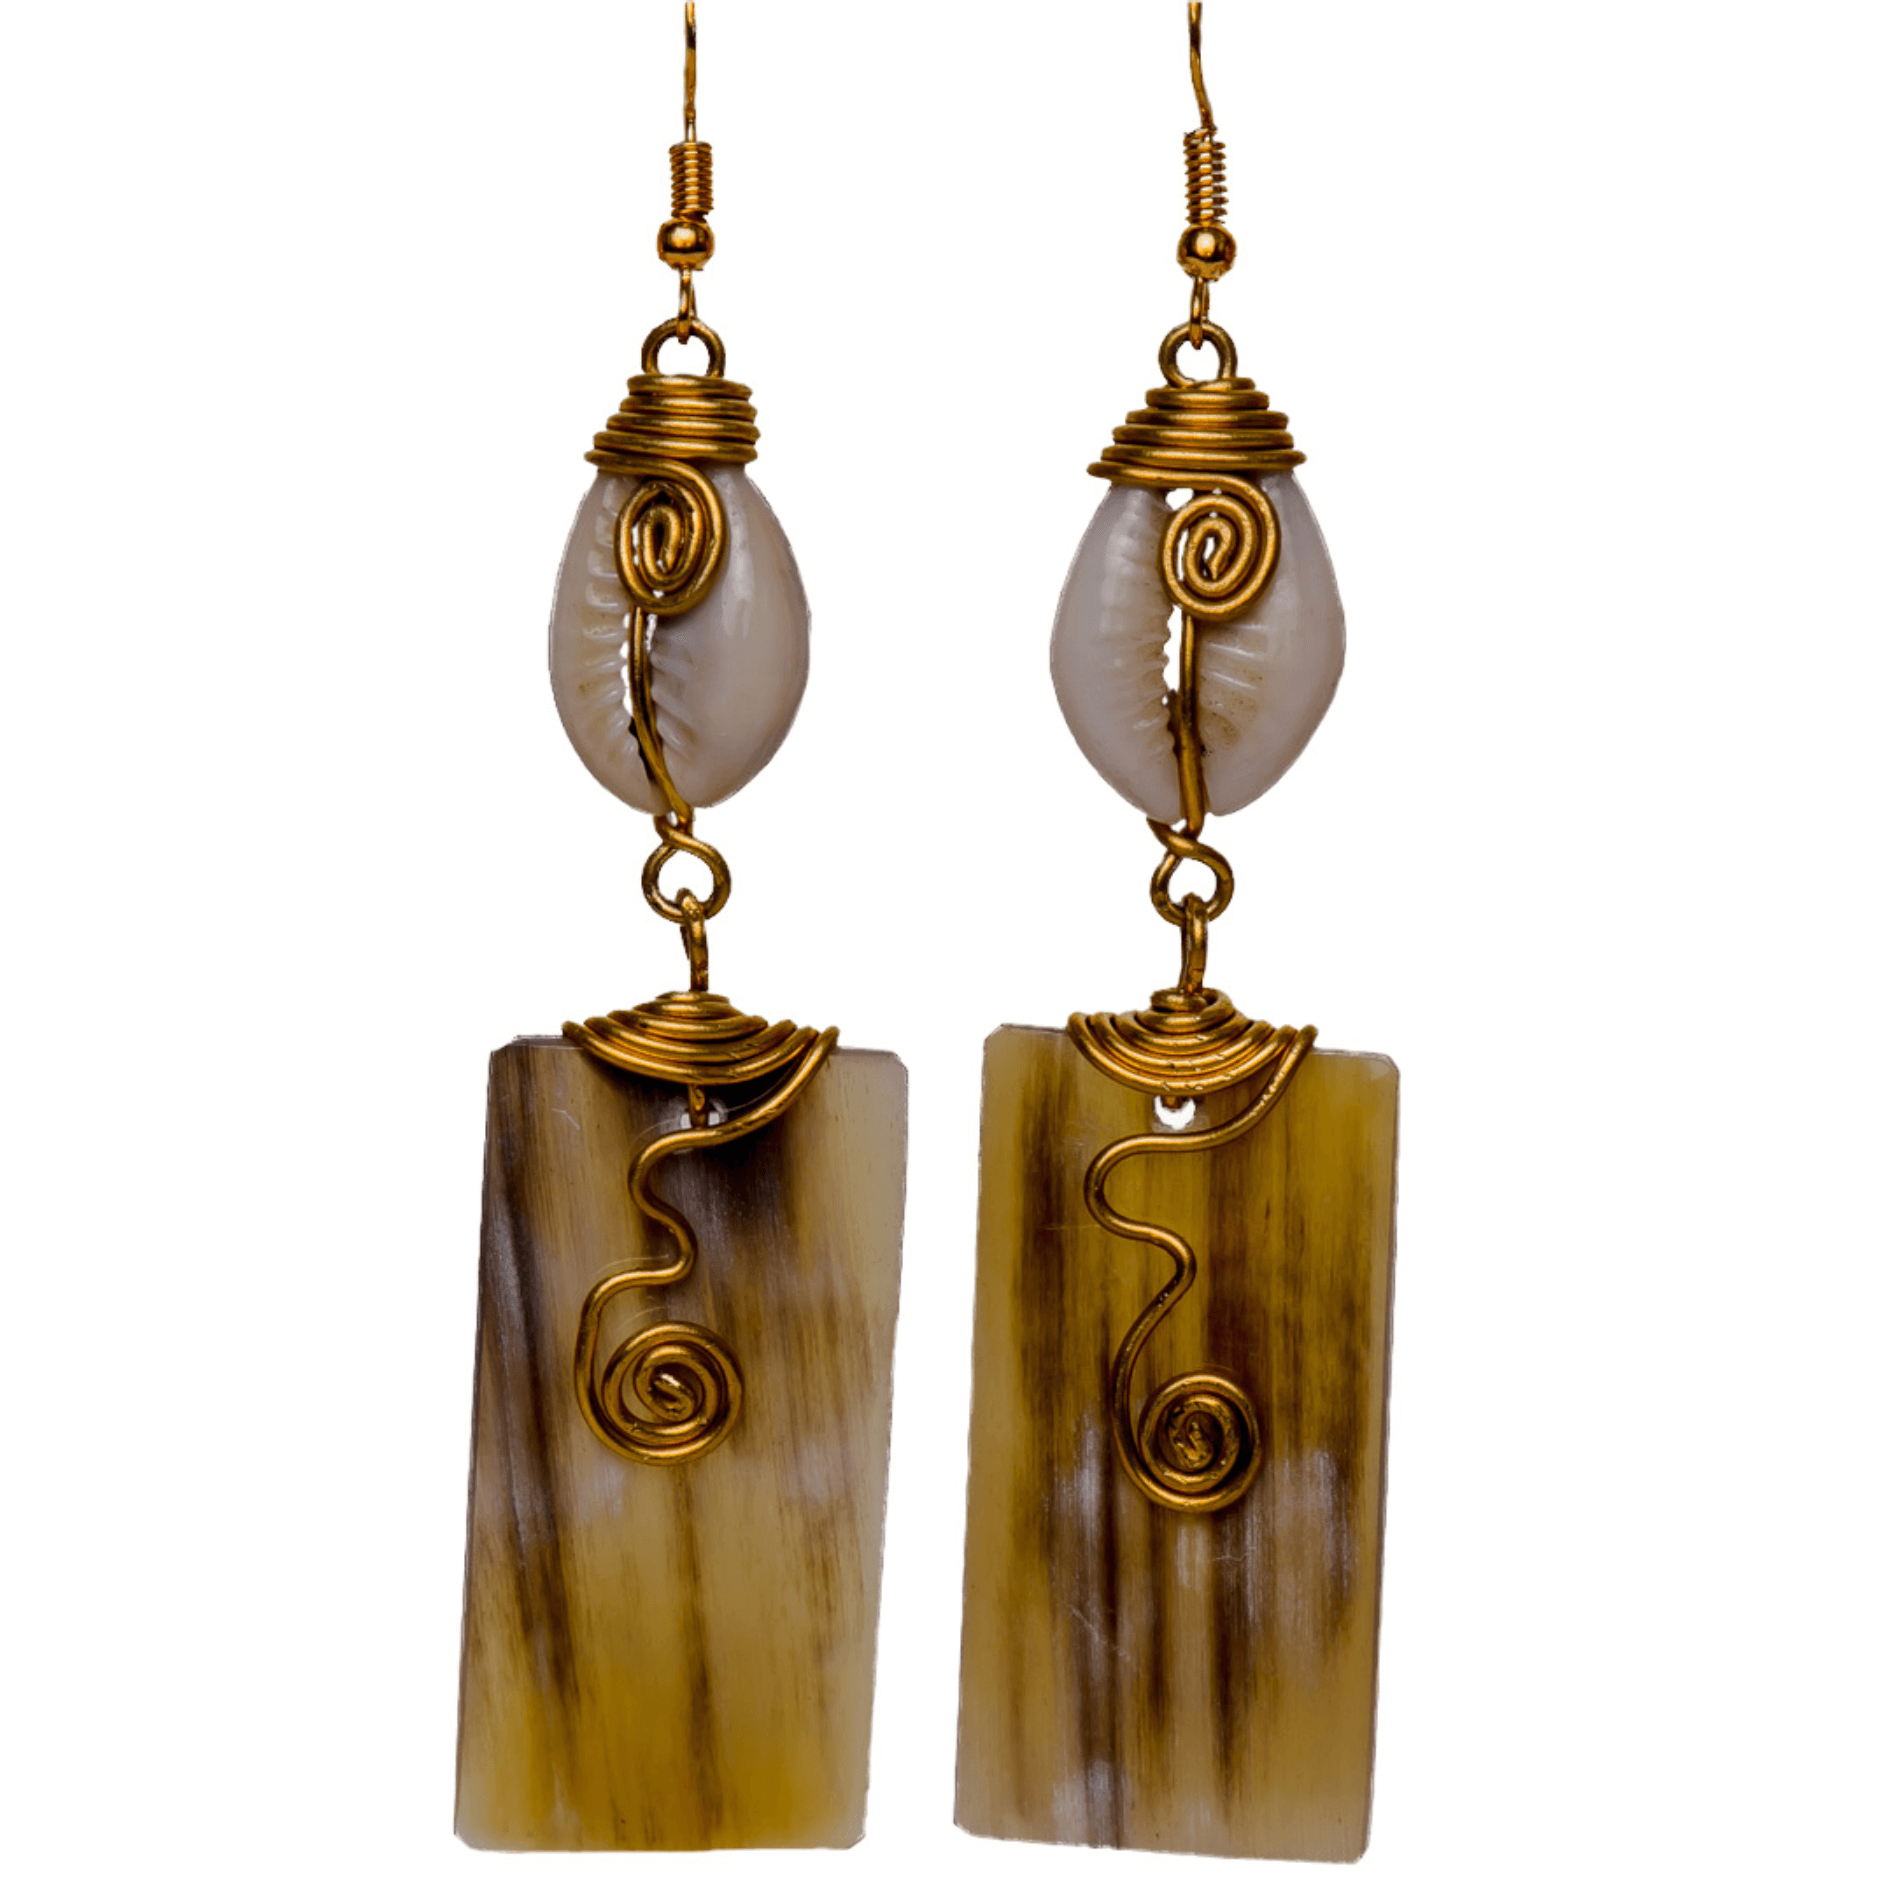 Unique Long Bar Earrings handmade with camel bones, cowries shells and gold plated brass